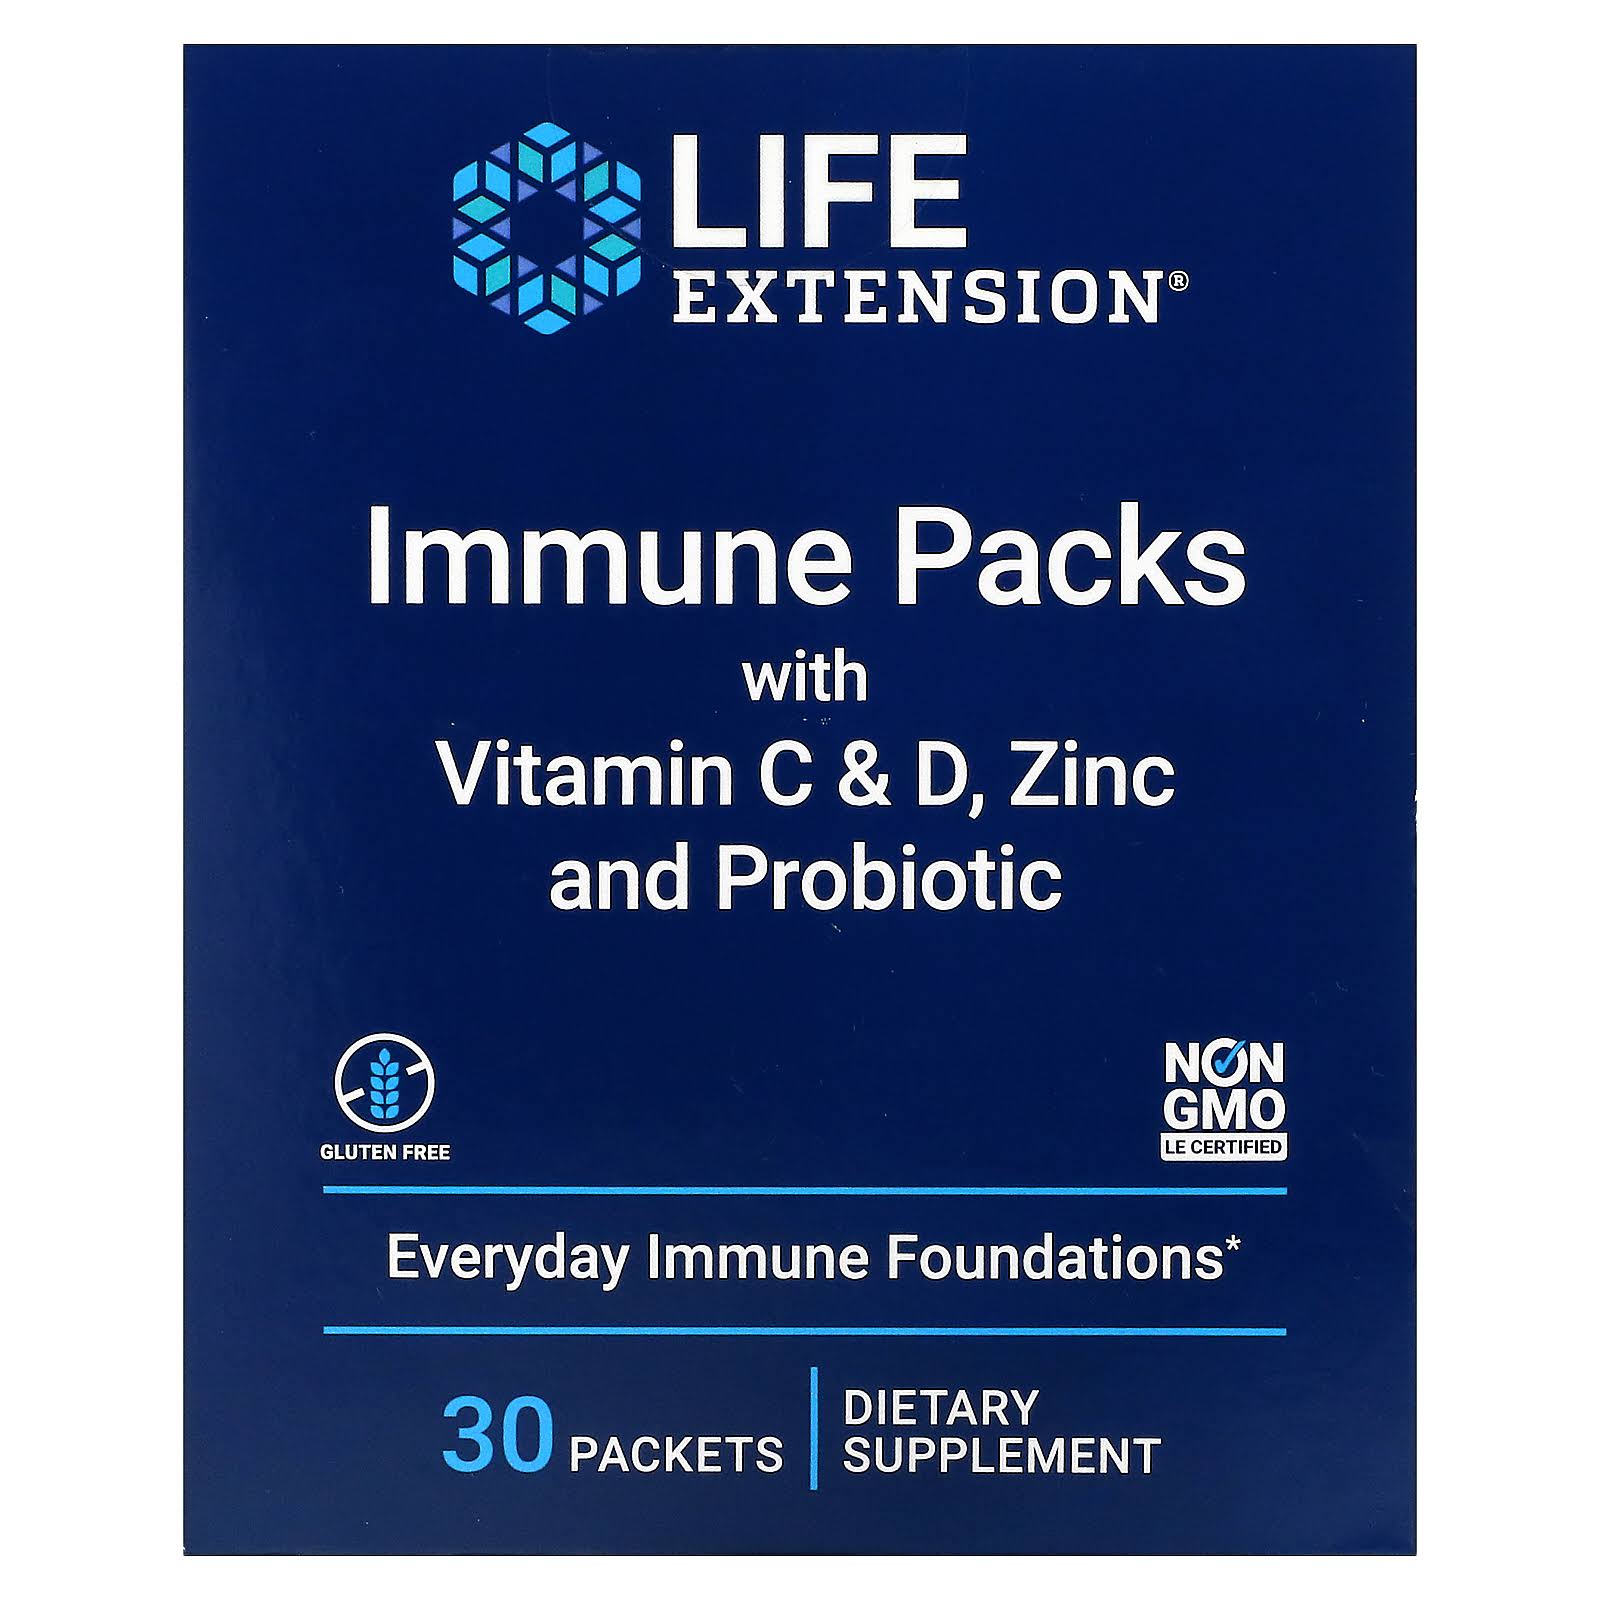 Life Extension Immune Packs - 30 Packets